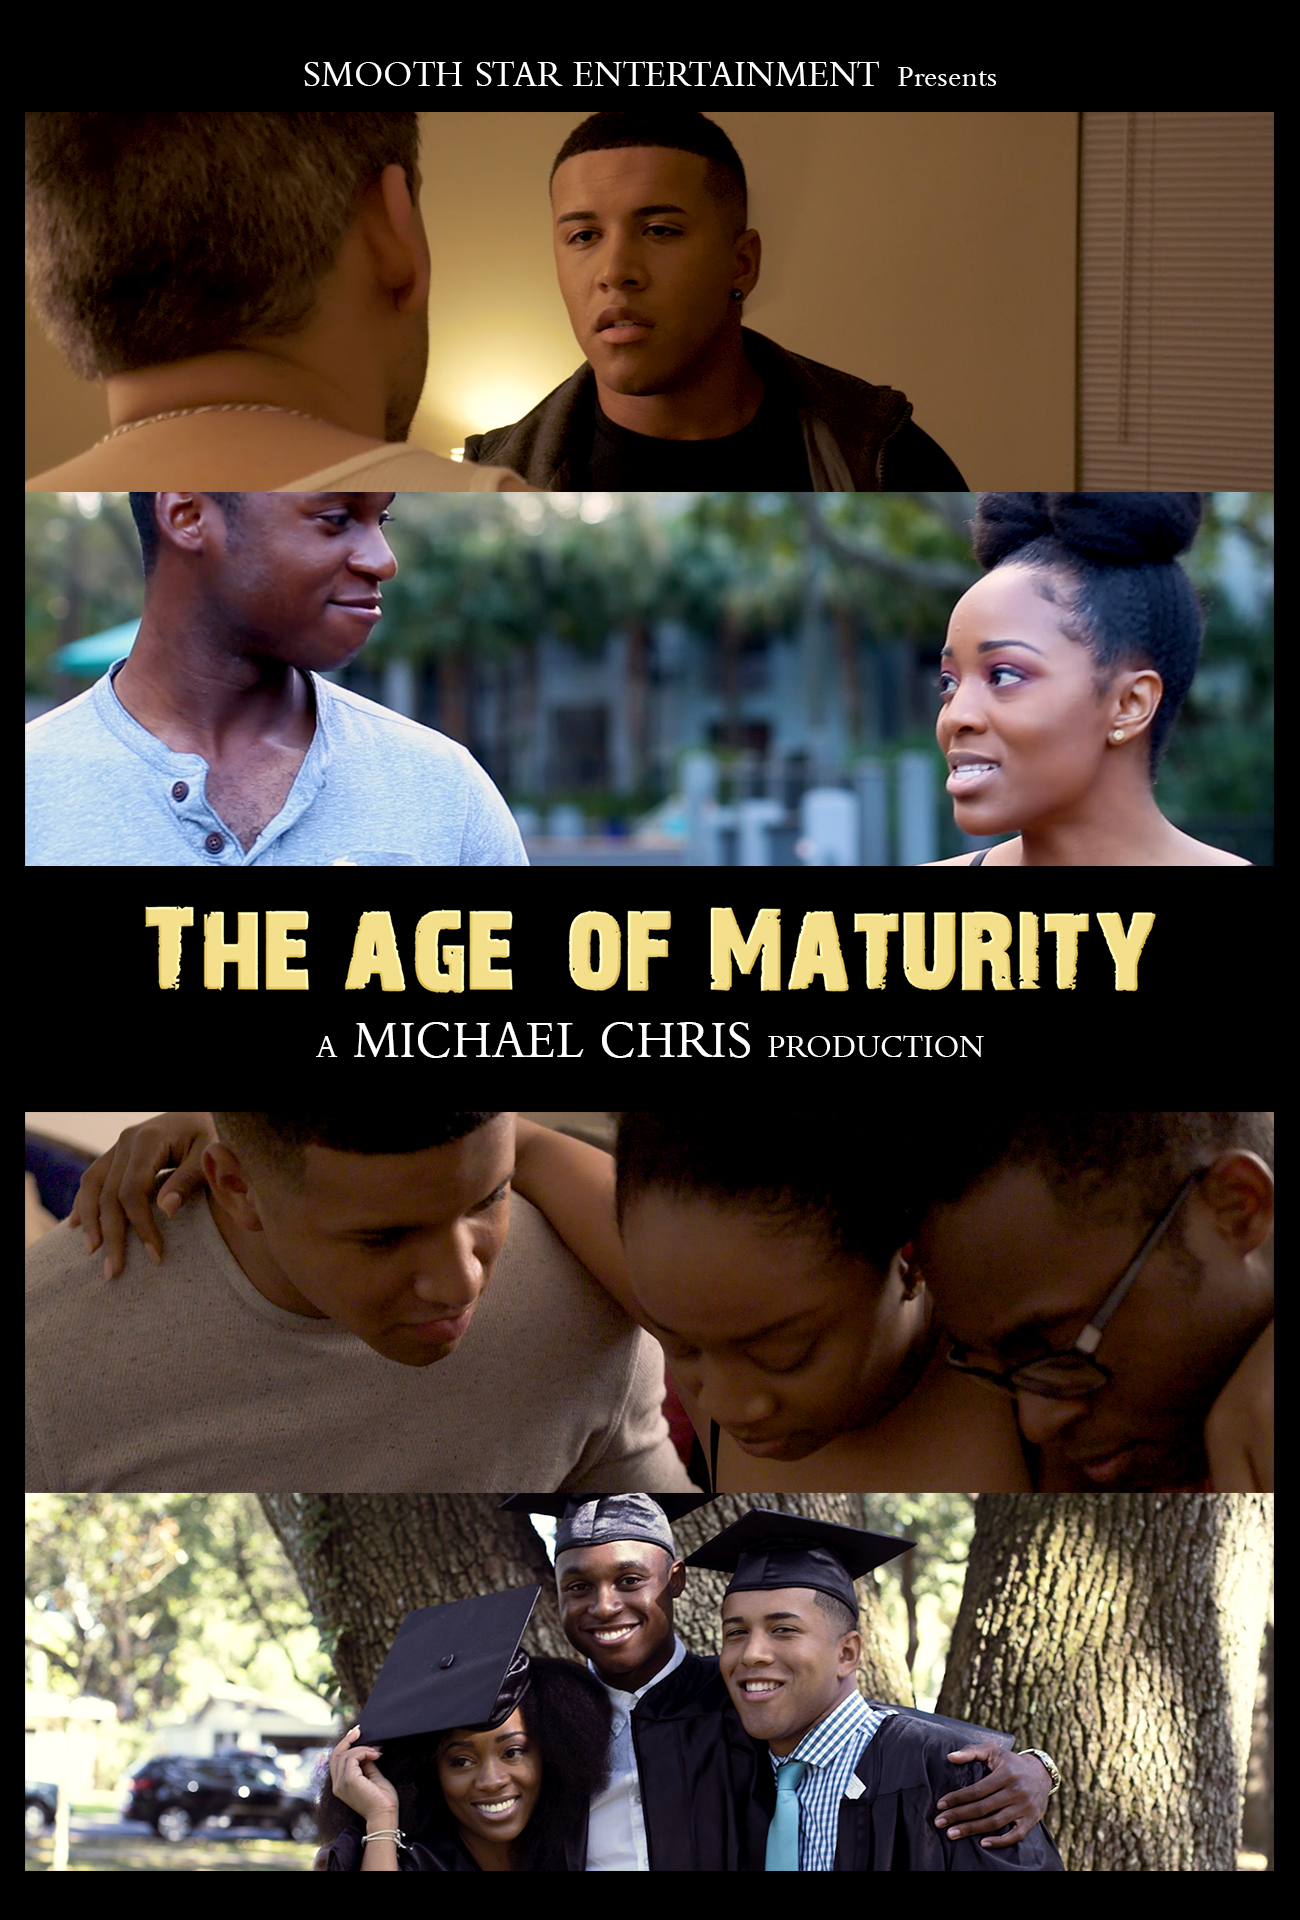 The Age of Maturity